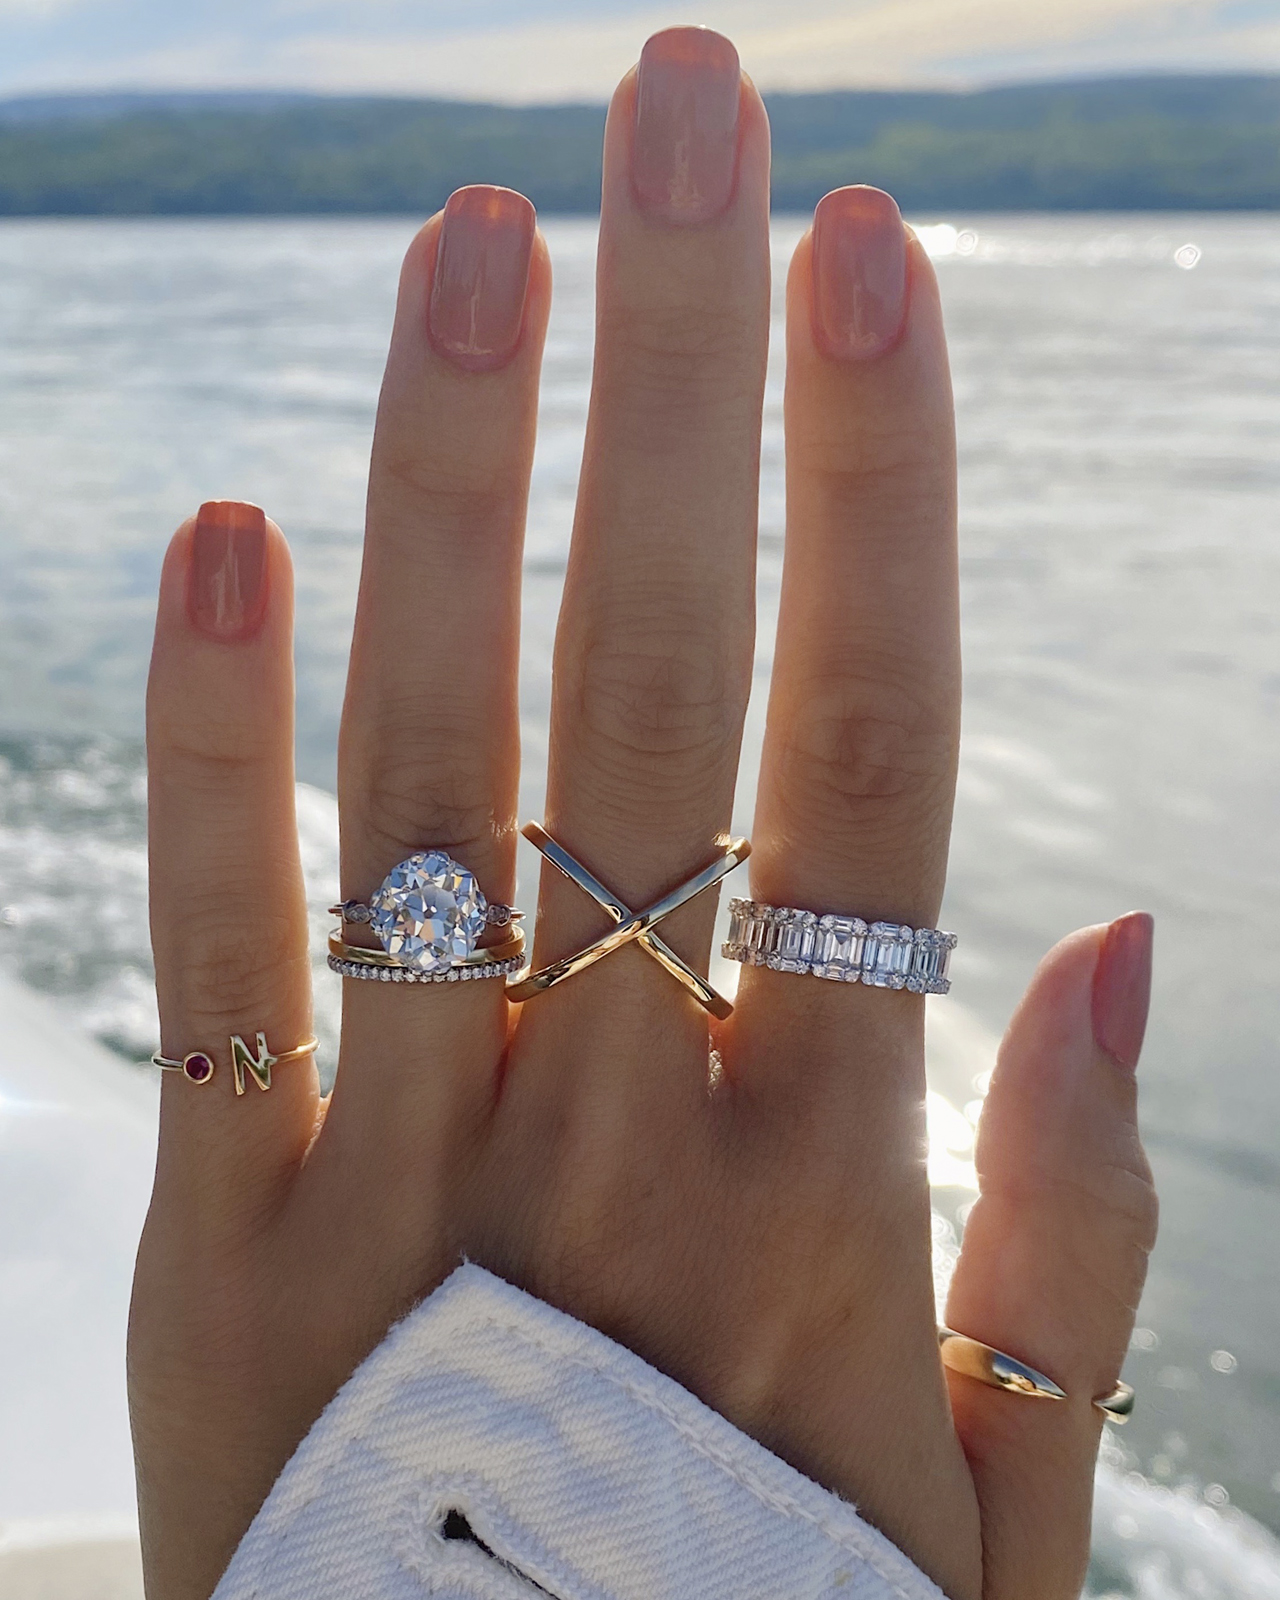 10 Engagement Ring Ideas From Top Jewelry Designers - Only Natural Diamonds